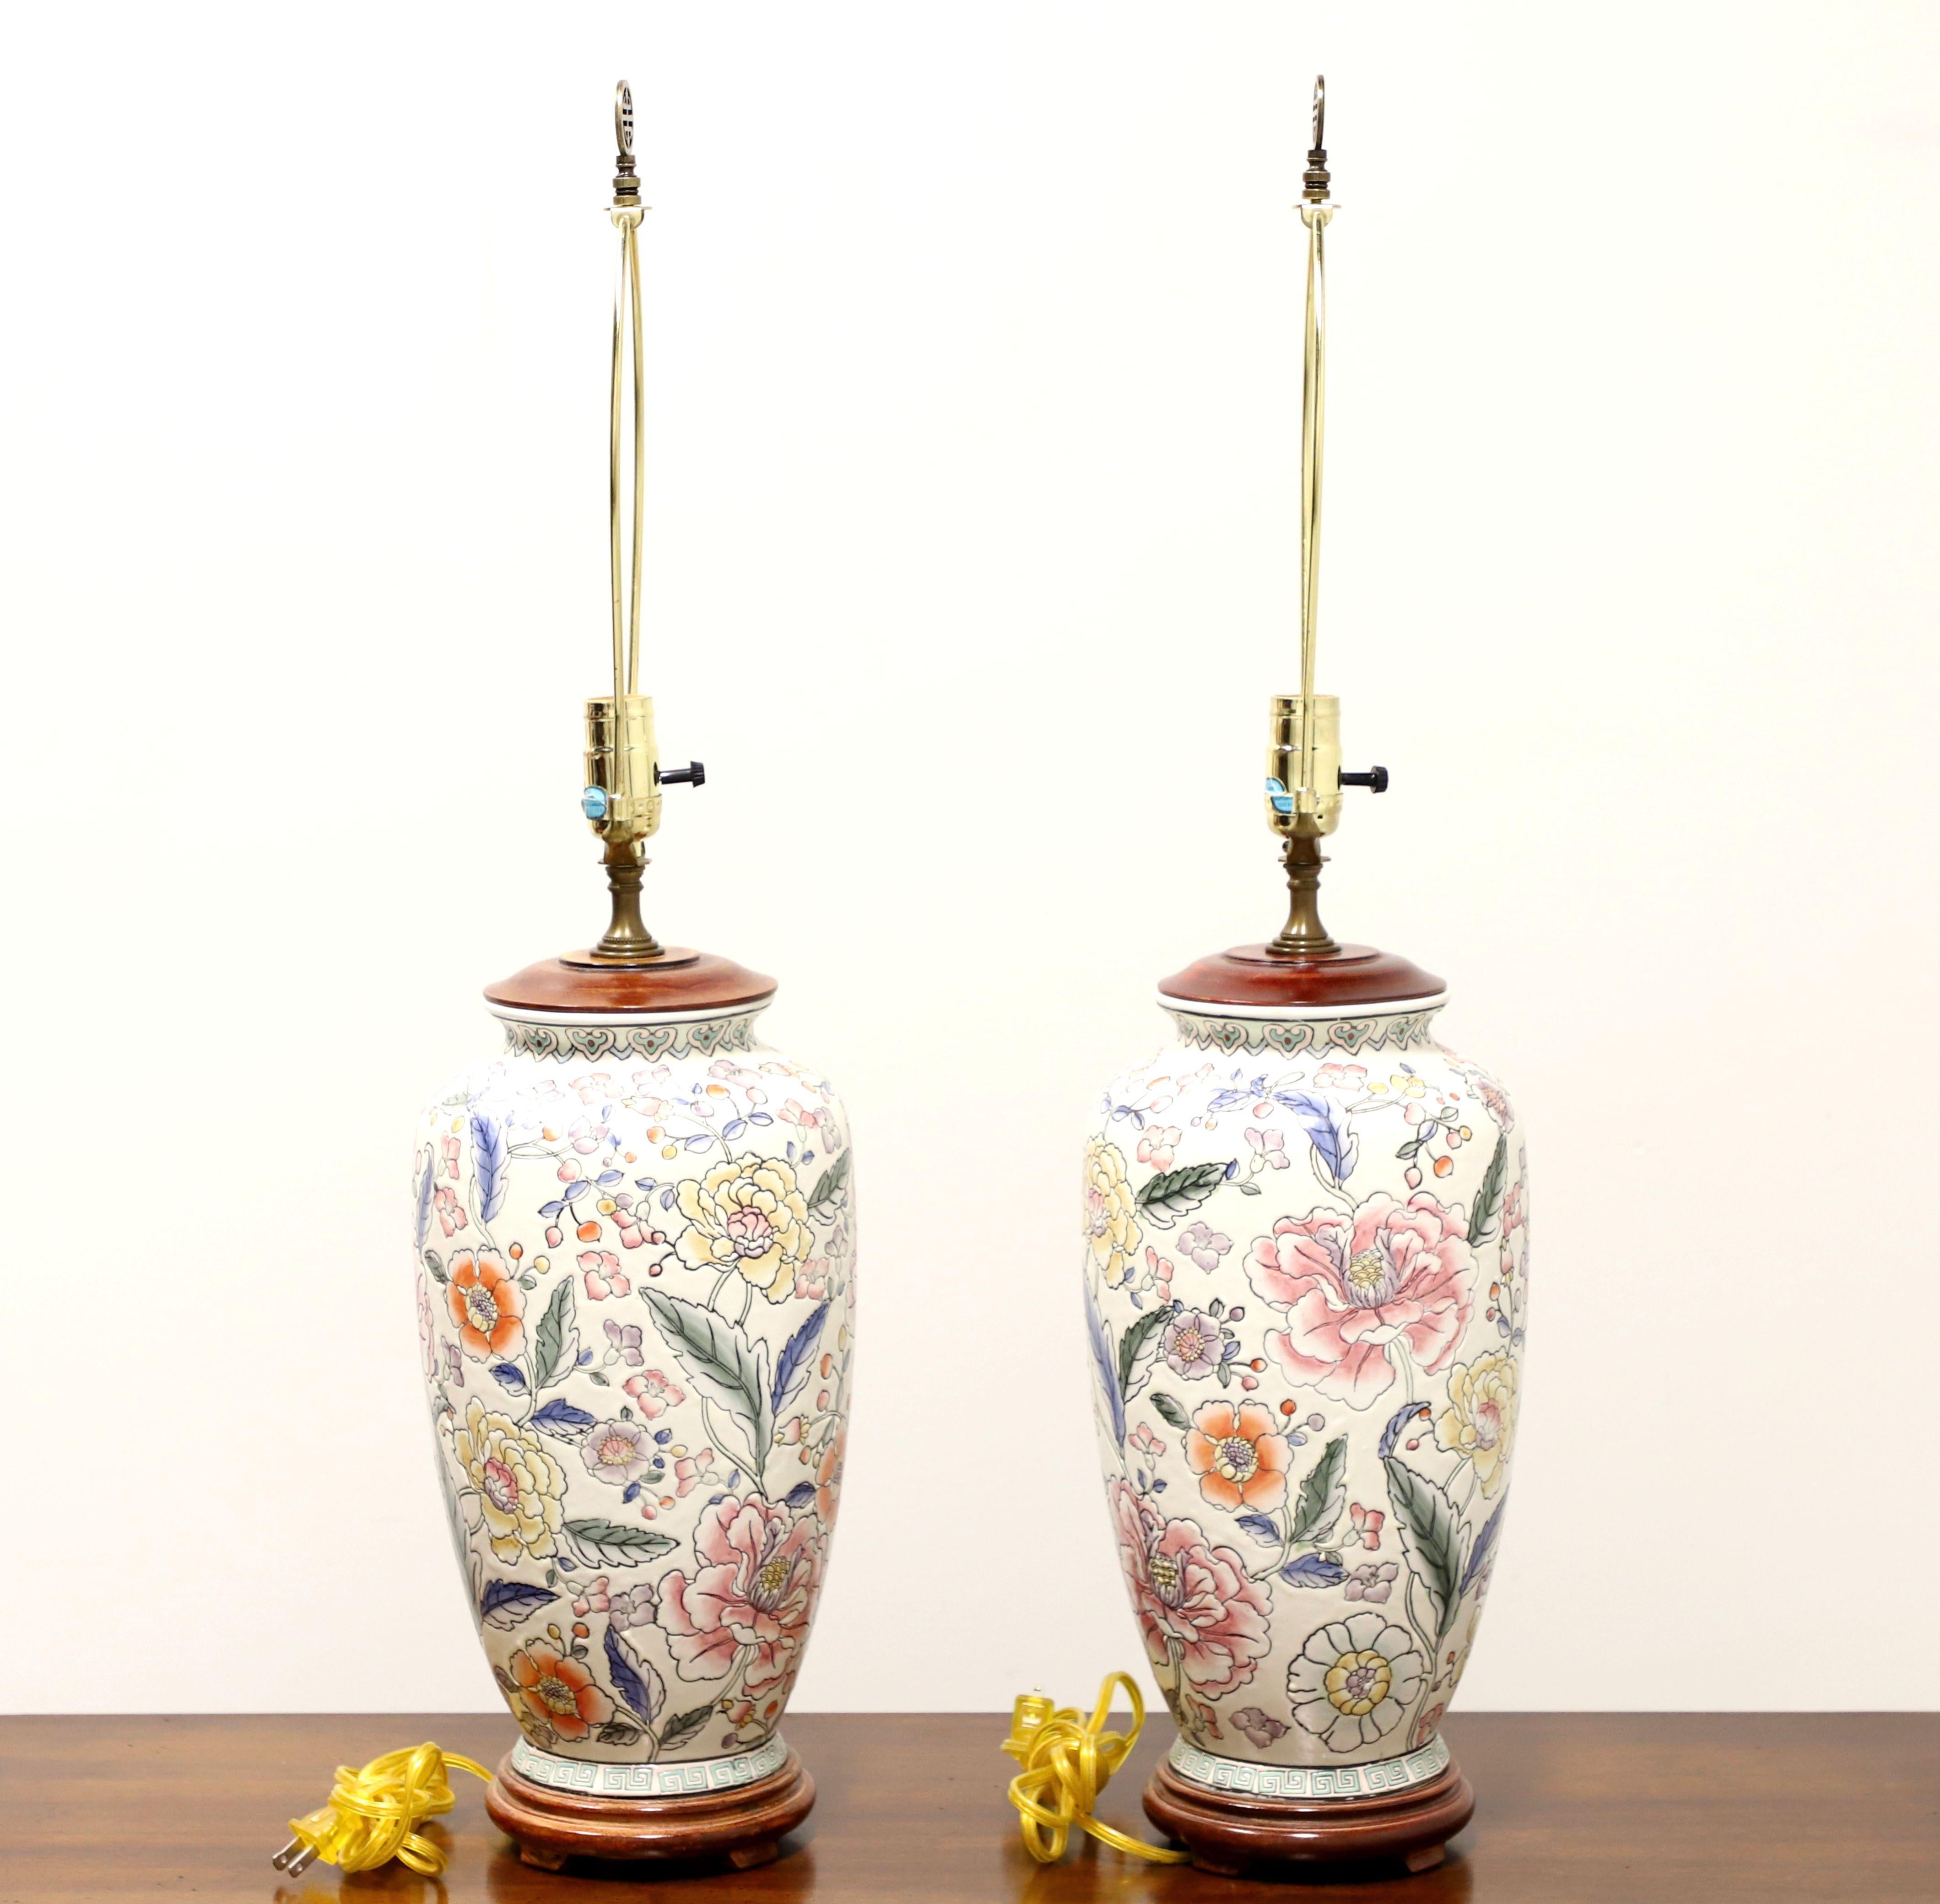 A pair of Asian Chinoiserie style table lamps, unbranded. Made of porcelain in an urn style, hand painted, with a creamy white base color, pink, yellow, orange, blue & green floral motif, a wood lid to top, and on a carved wood base. Has a metal